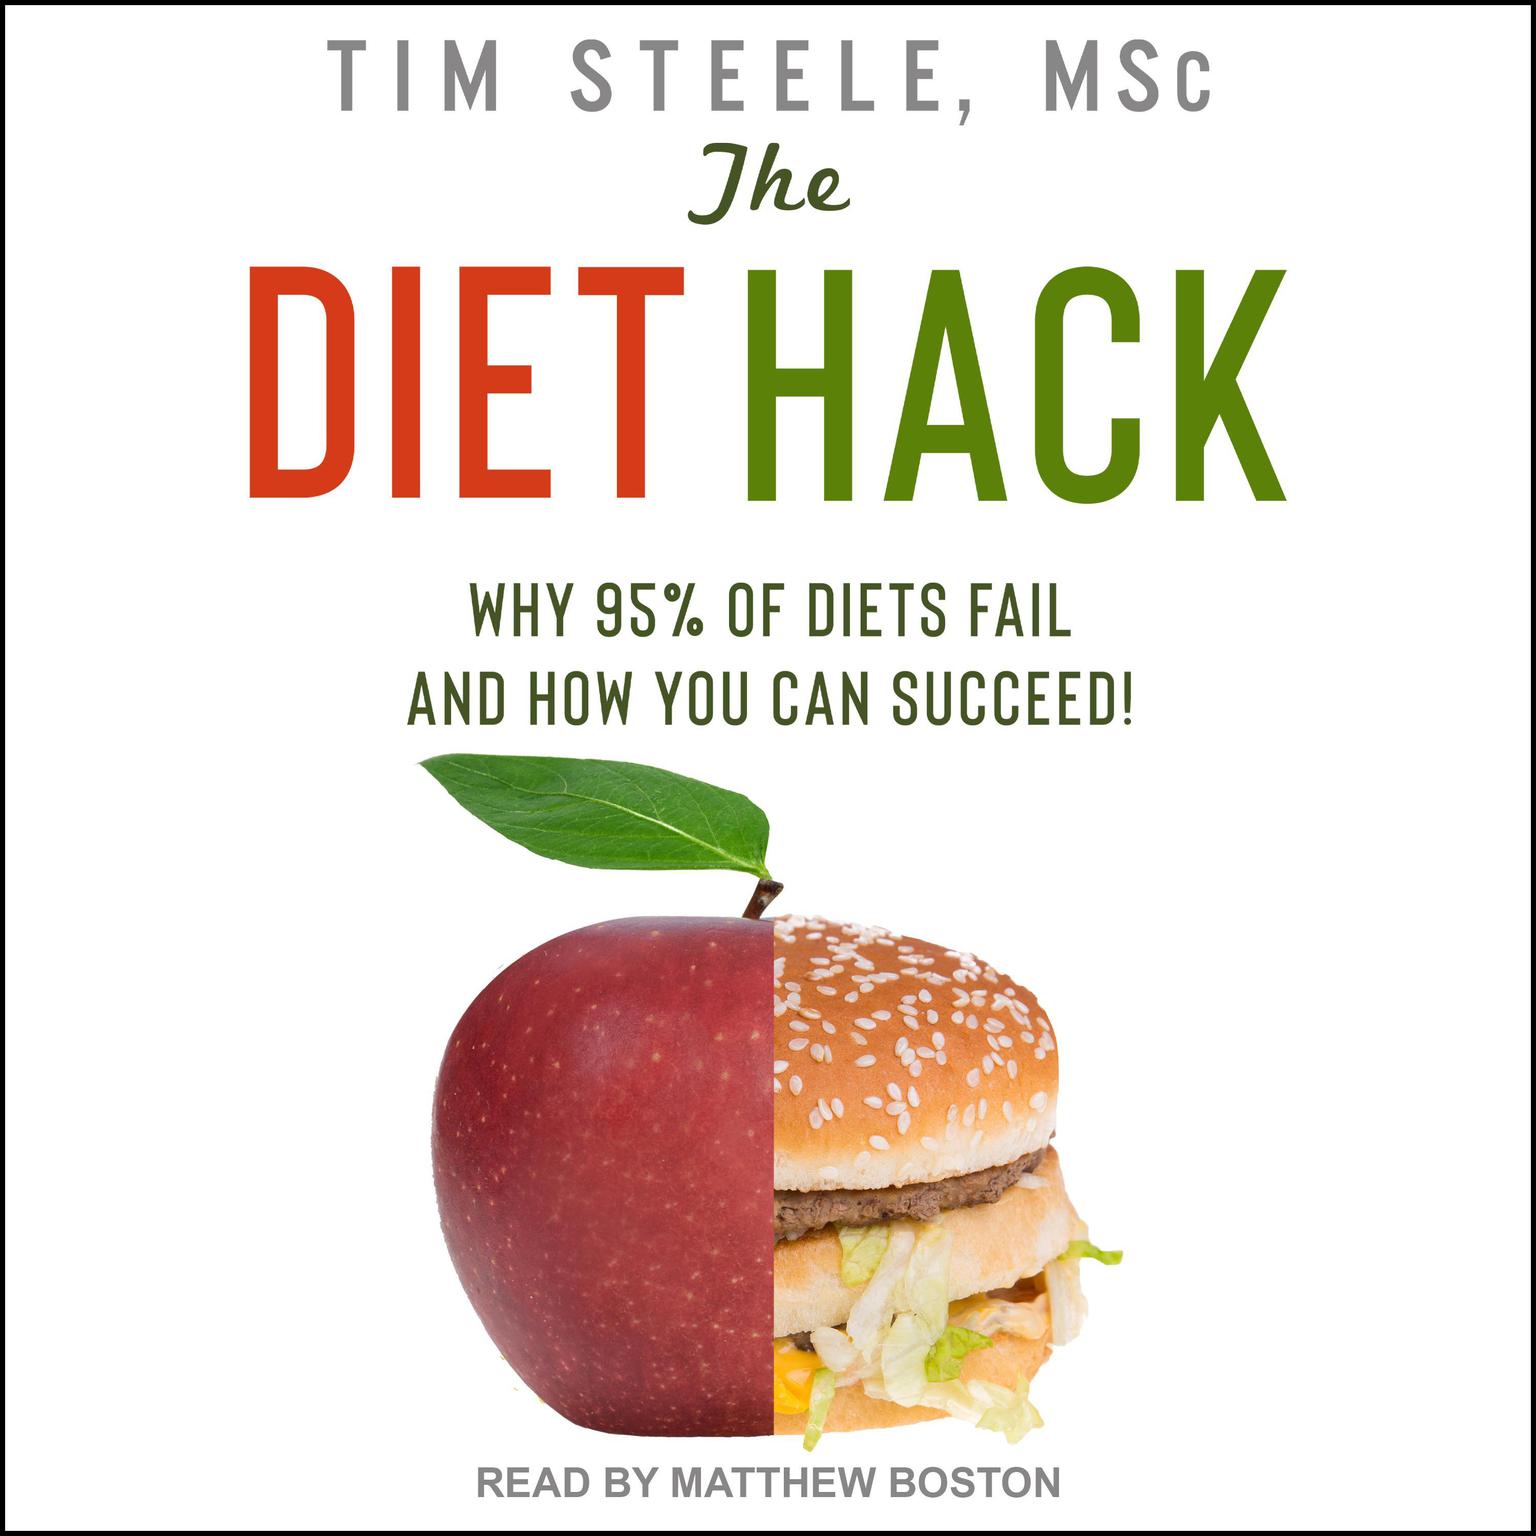 The Diet Hack: Why 95% of diets fail and how you can succeed Audiobook, by Tim Steele